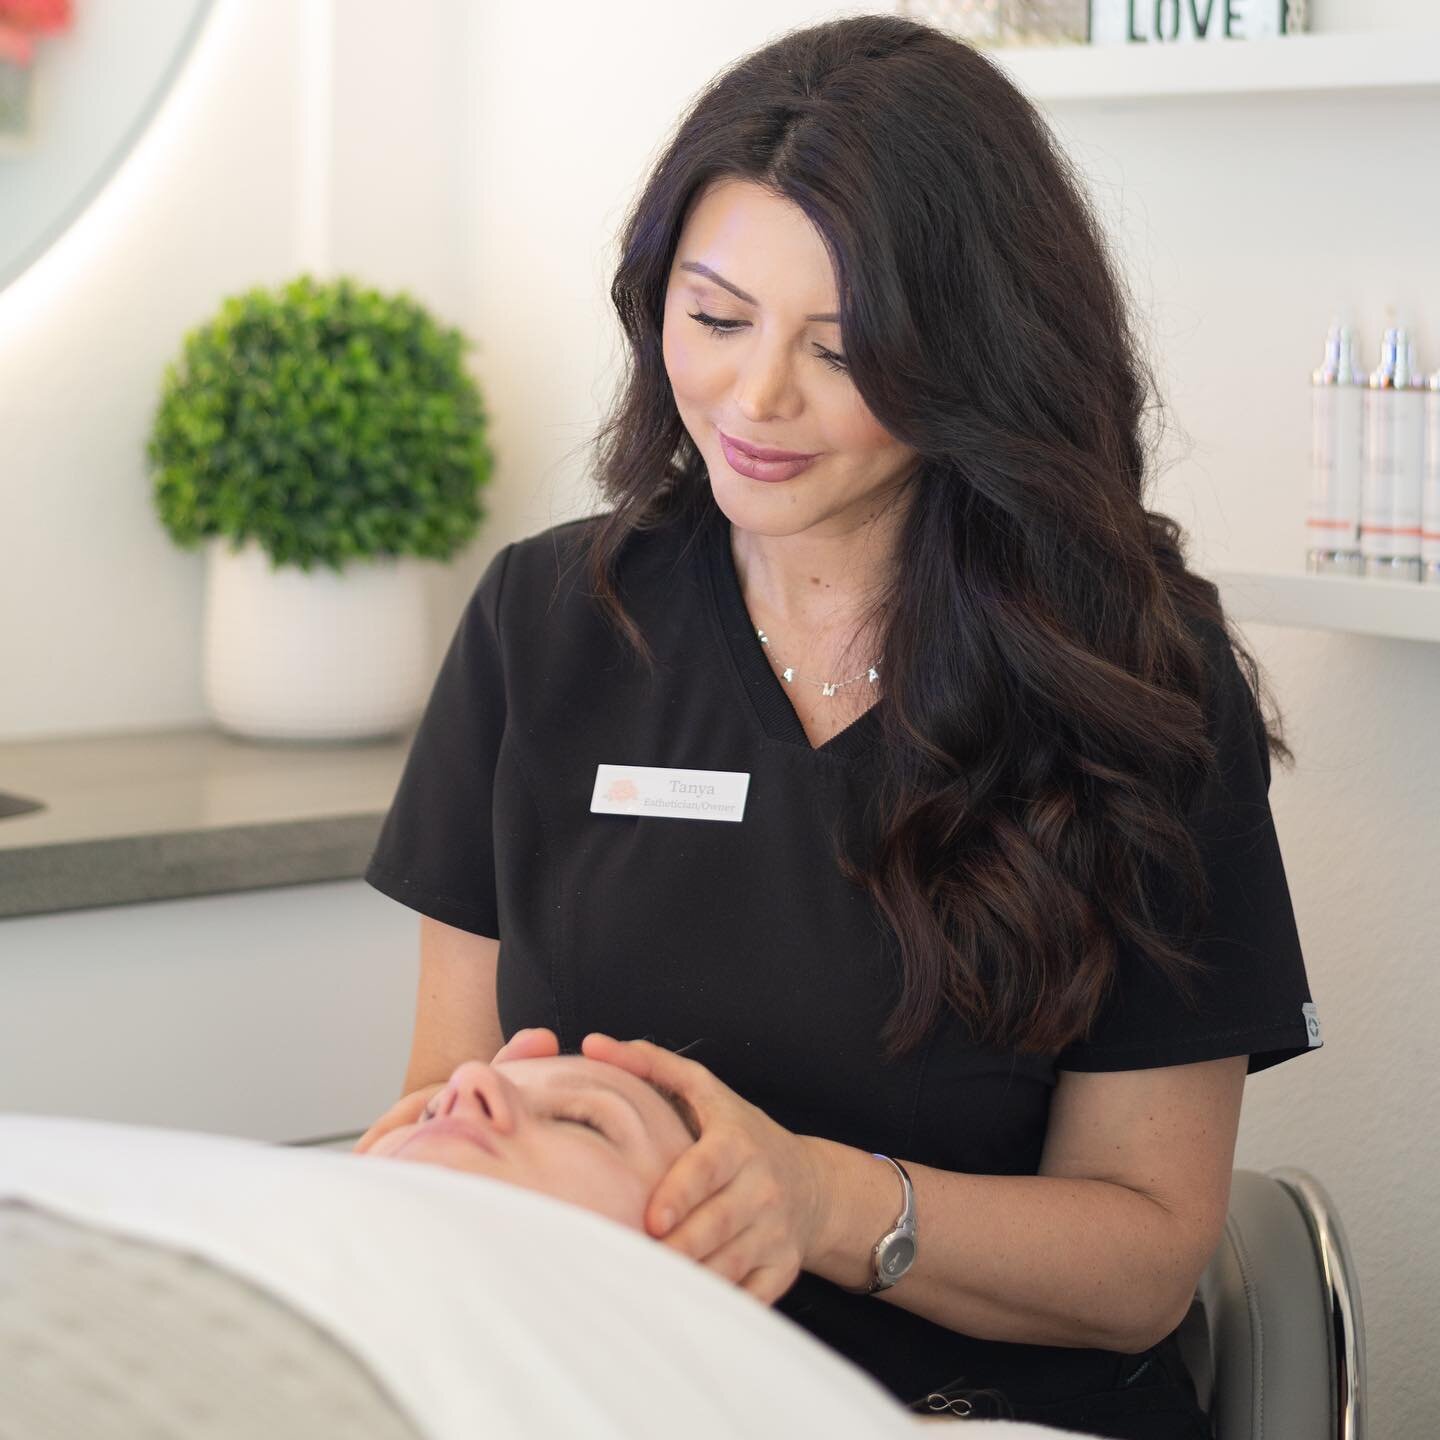 You just booked your first facial (congratulations)! Here are a few insider tips to prepare you for your treatment ⬇️

✨ Discontinue strong exfoliation products a few days prior to your treatment
✨ Be open and honest with your esthetician about your 